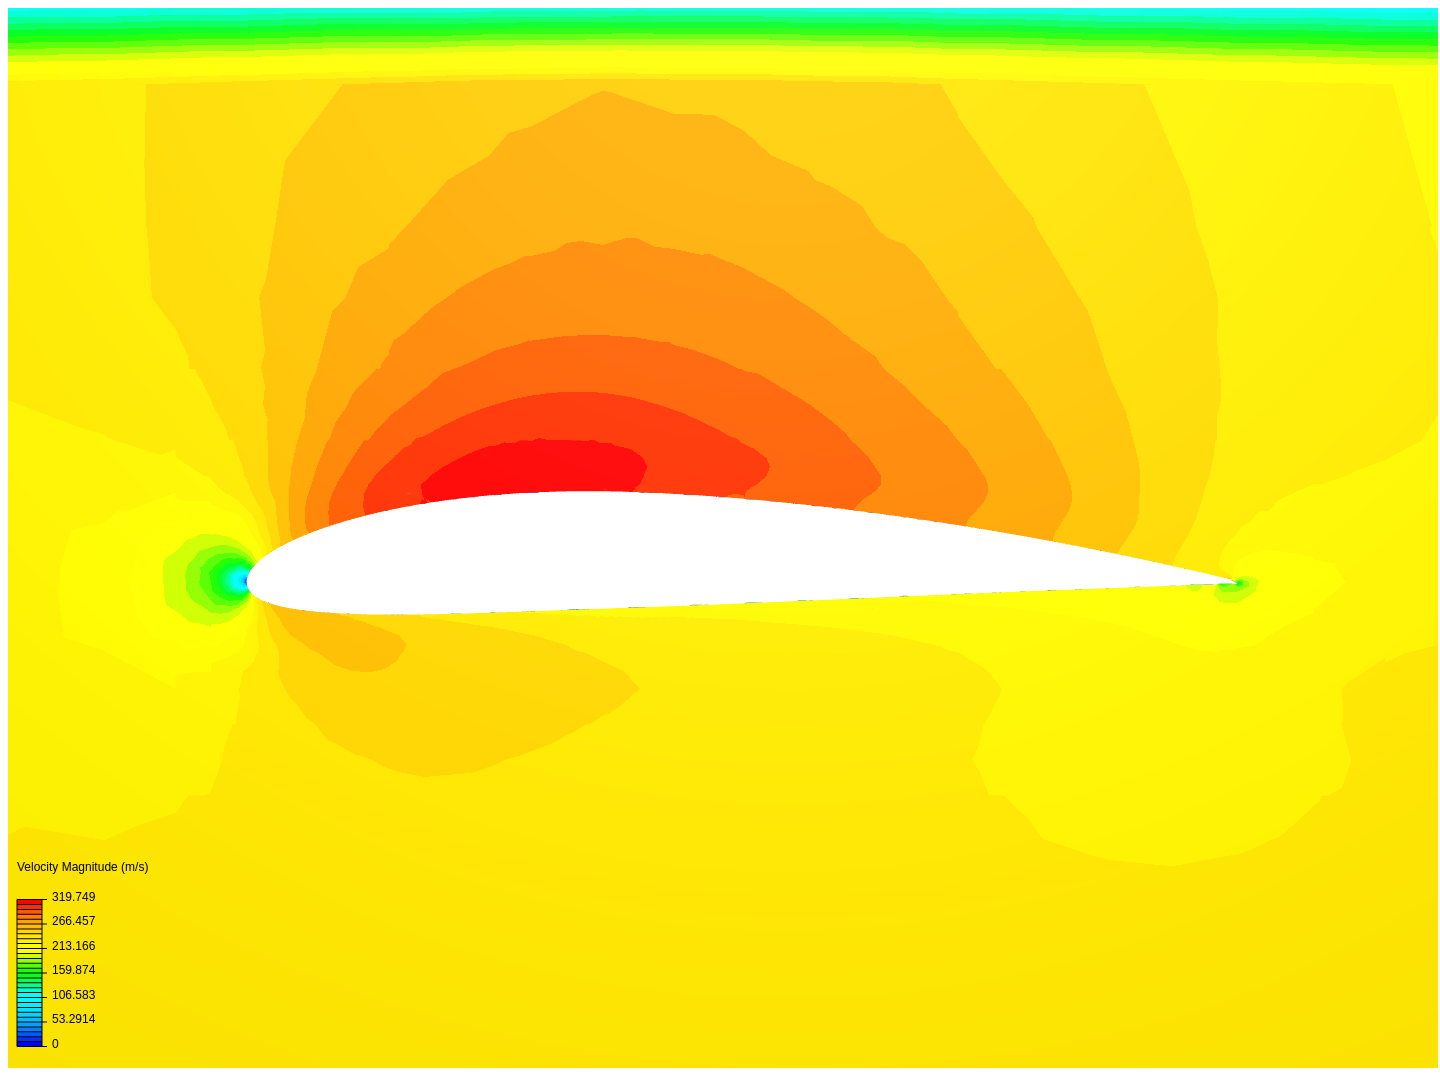 airfoil image